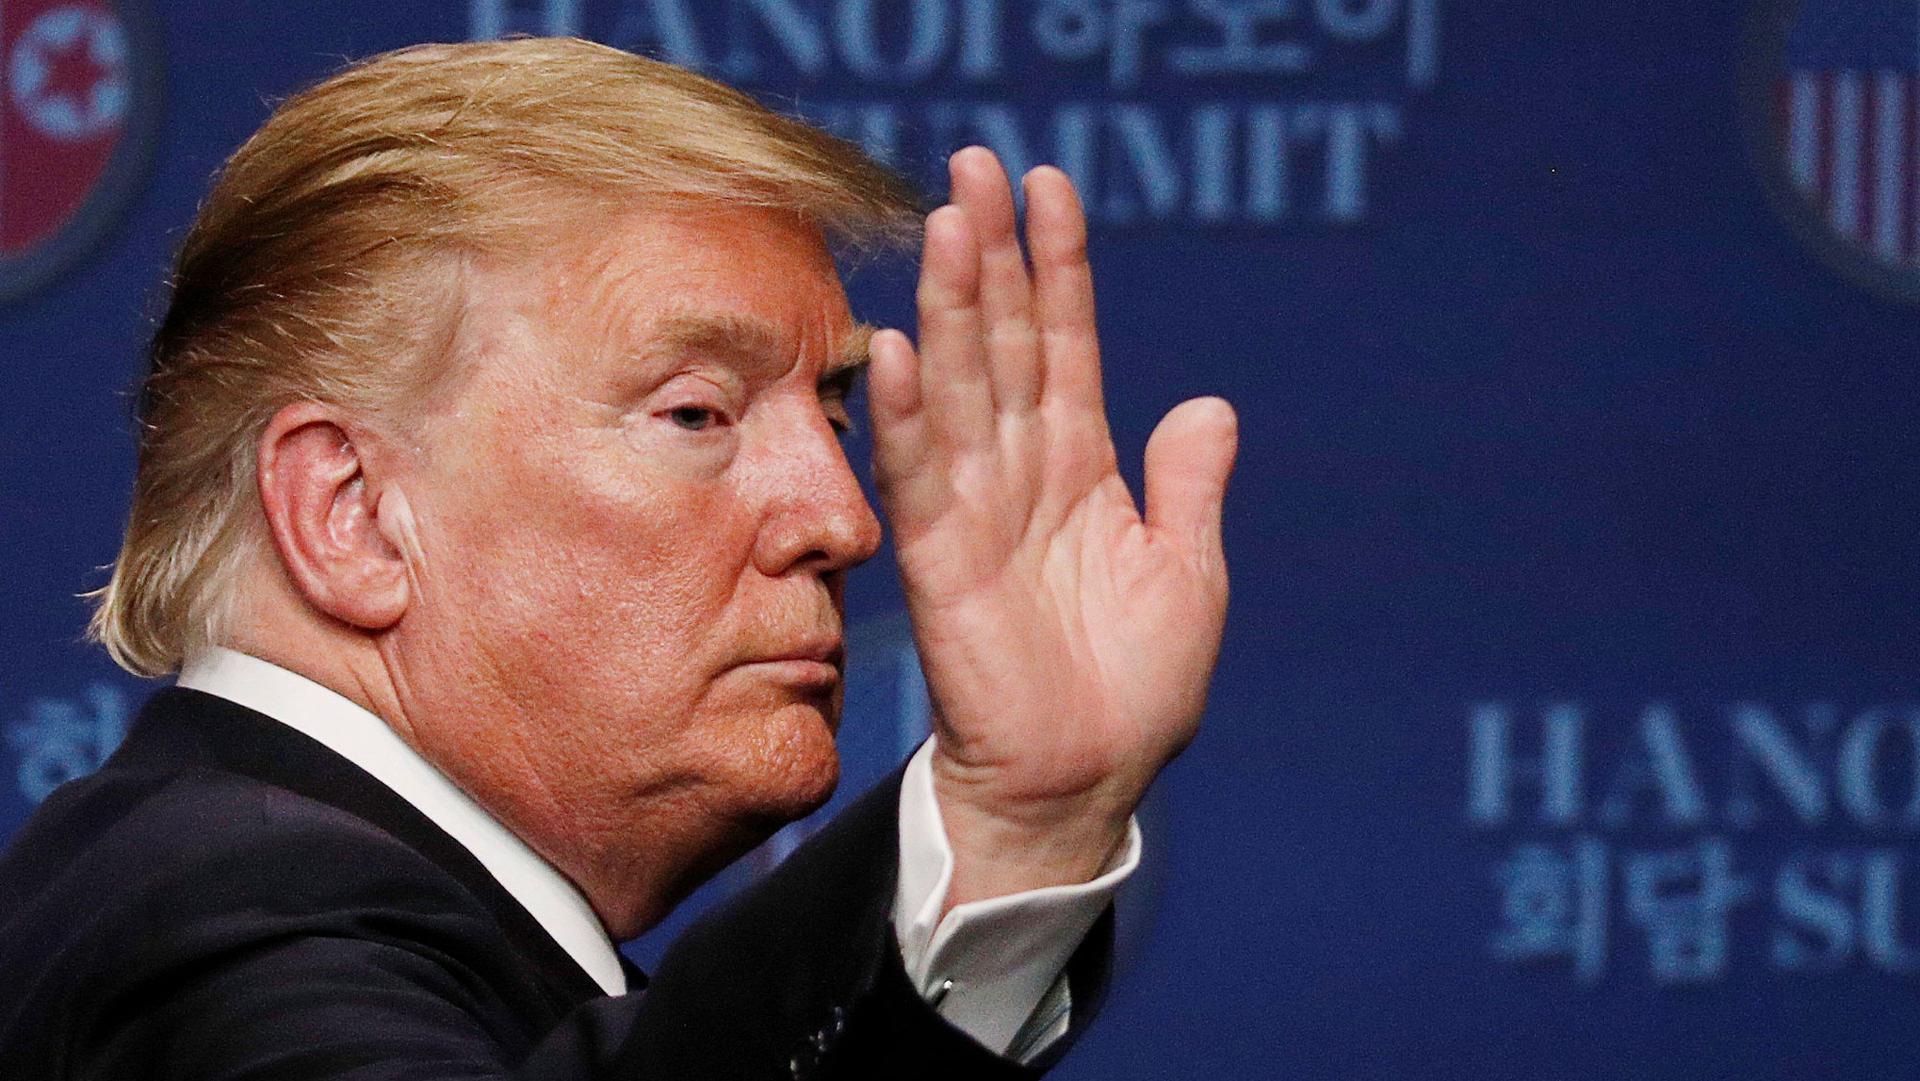 President Donald Trump is shown with his hand up during a news conference in Hanoi, Vietnam.